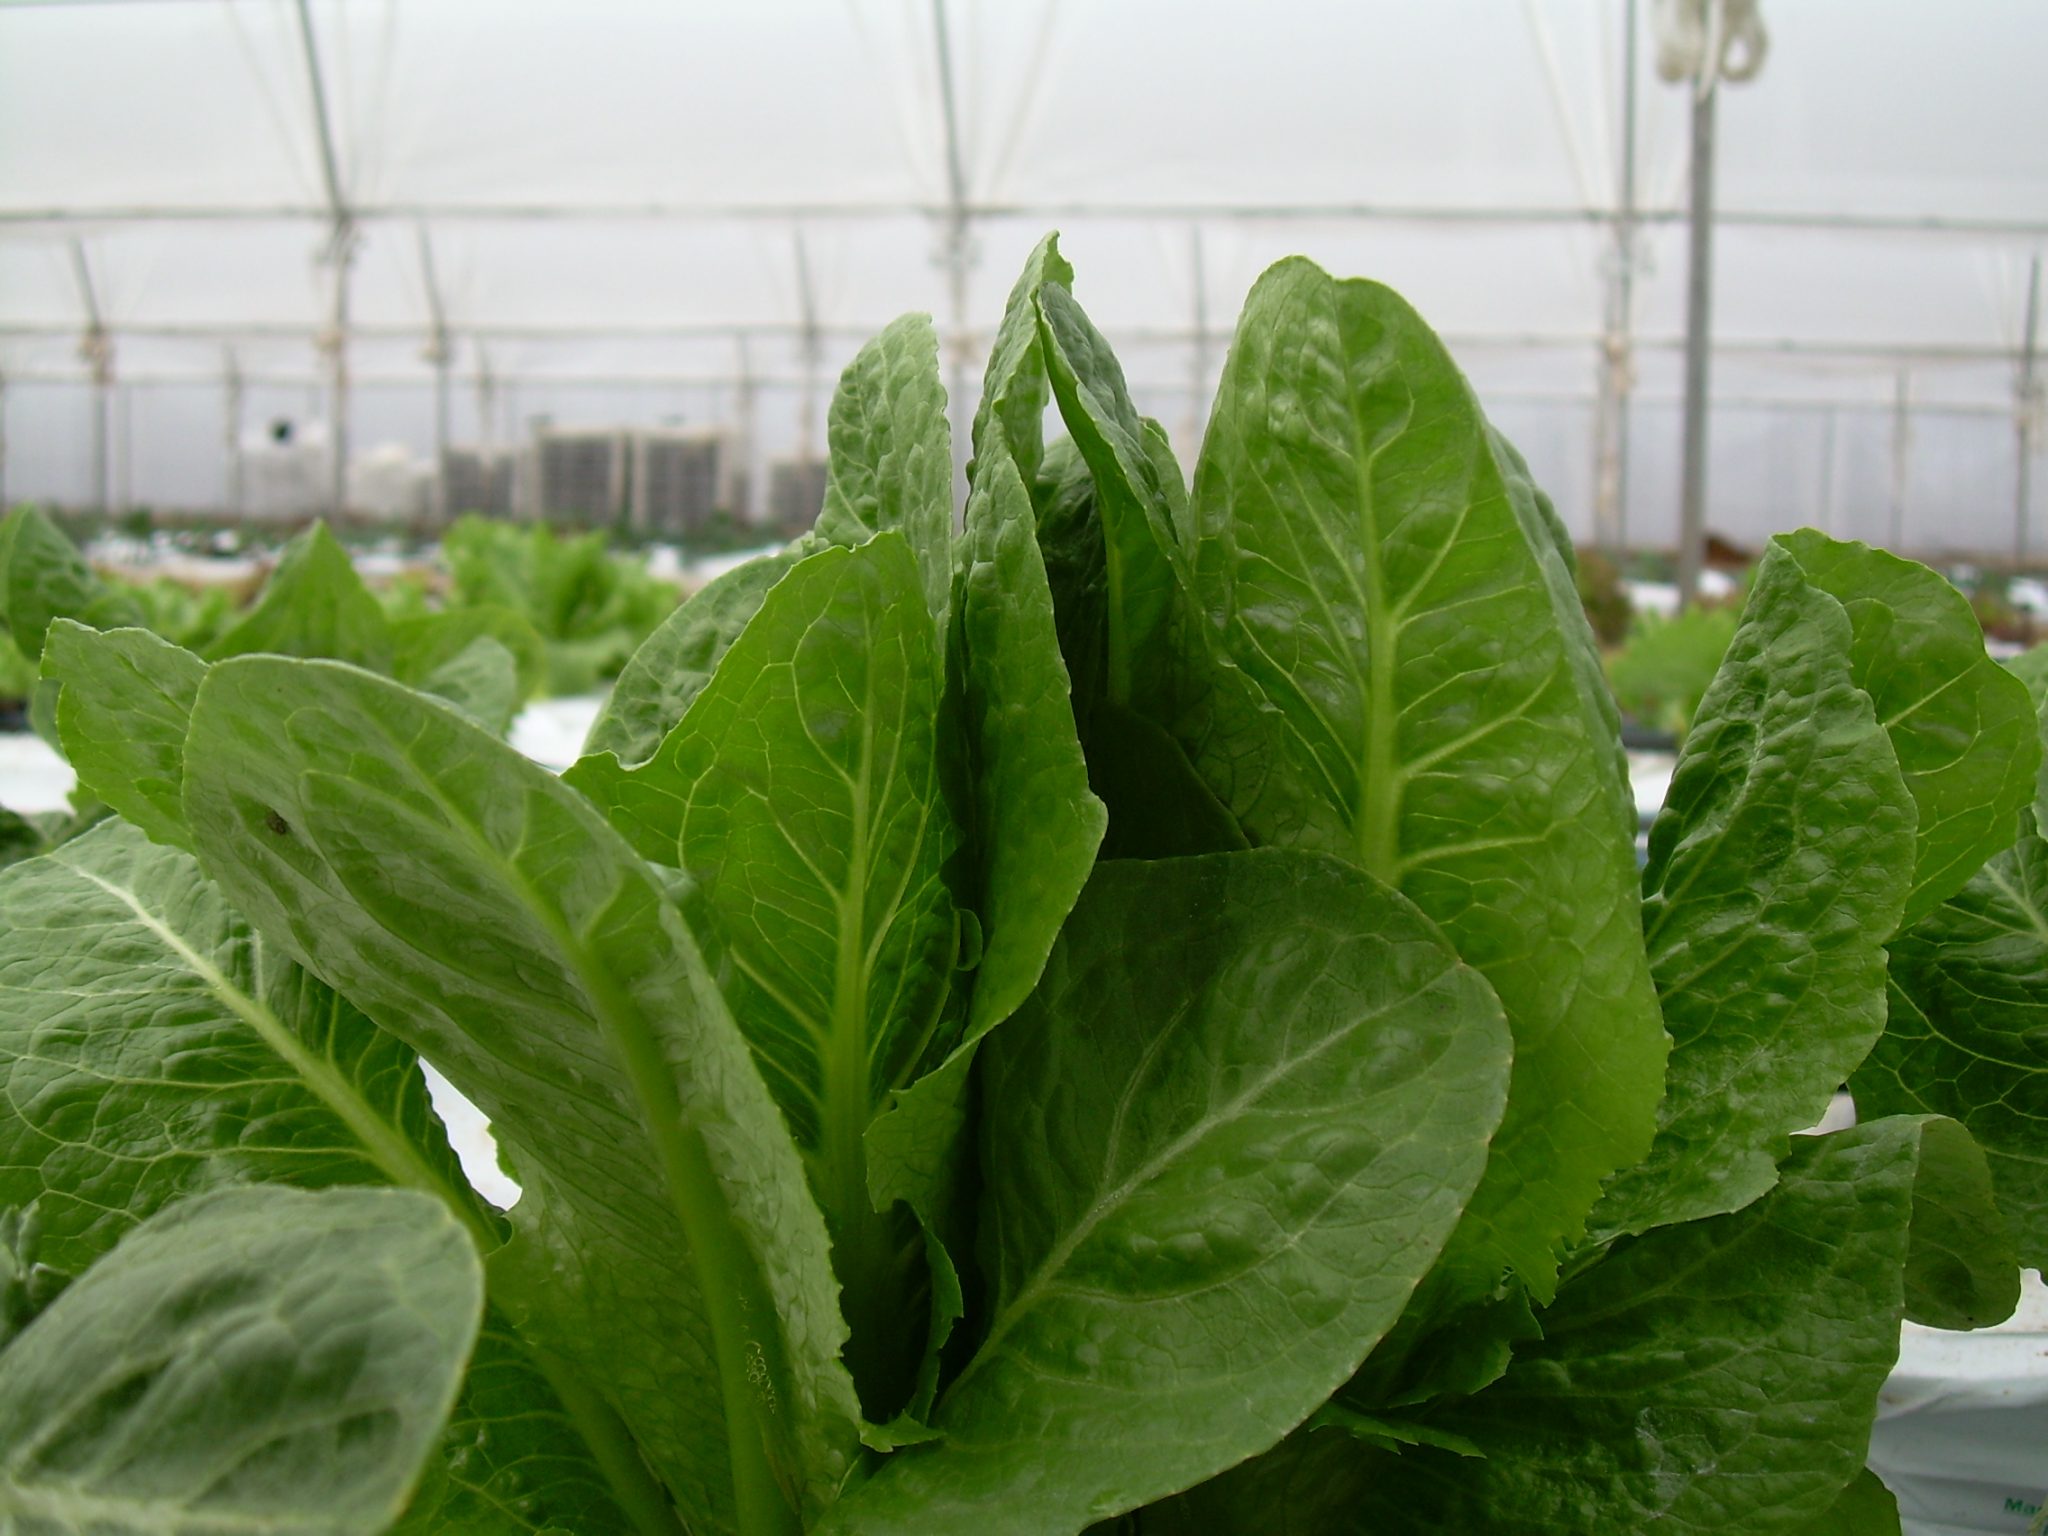 Organic insecticides should be used in a small area first to observe any phytotoxic effects. Green leafy vegetables can be sensitive to some insecticide formulations.